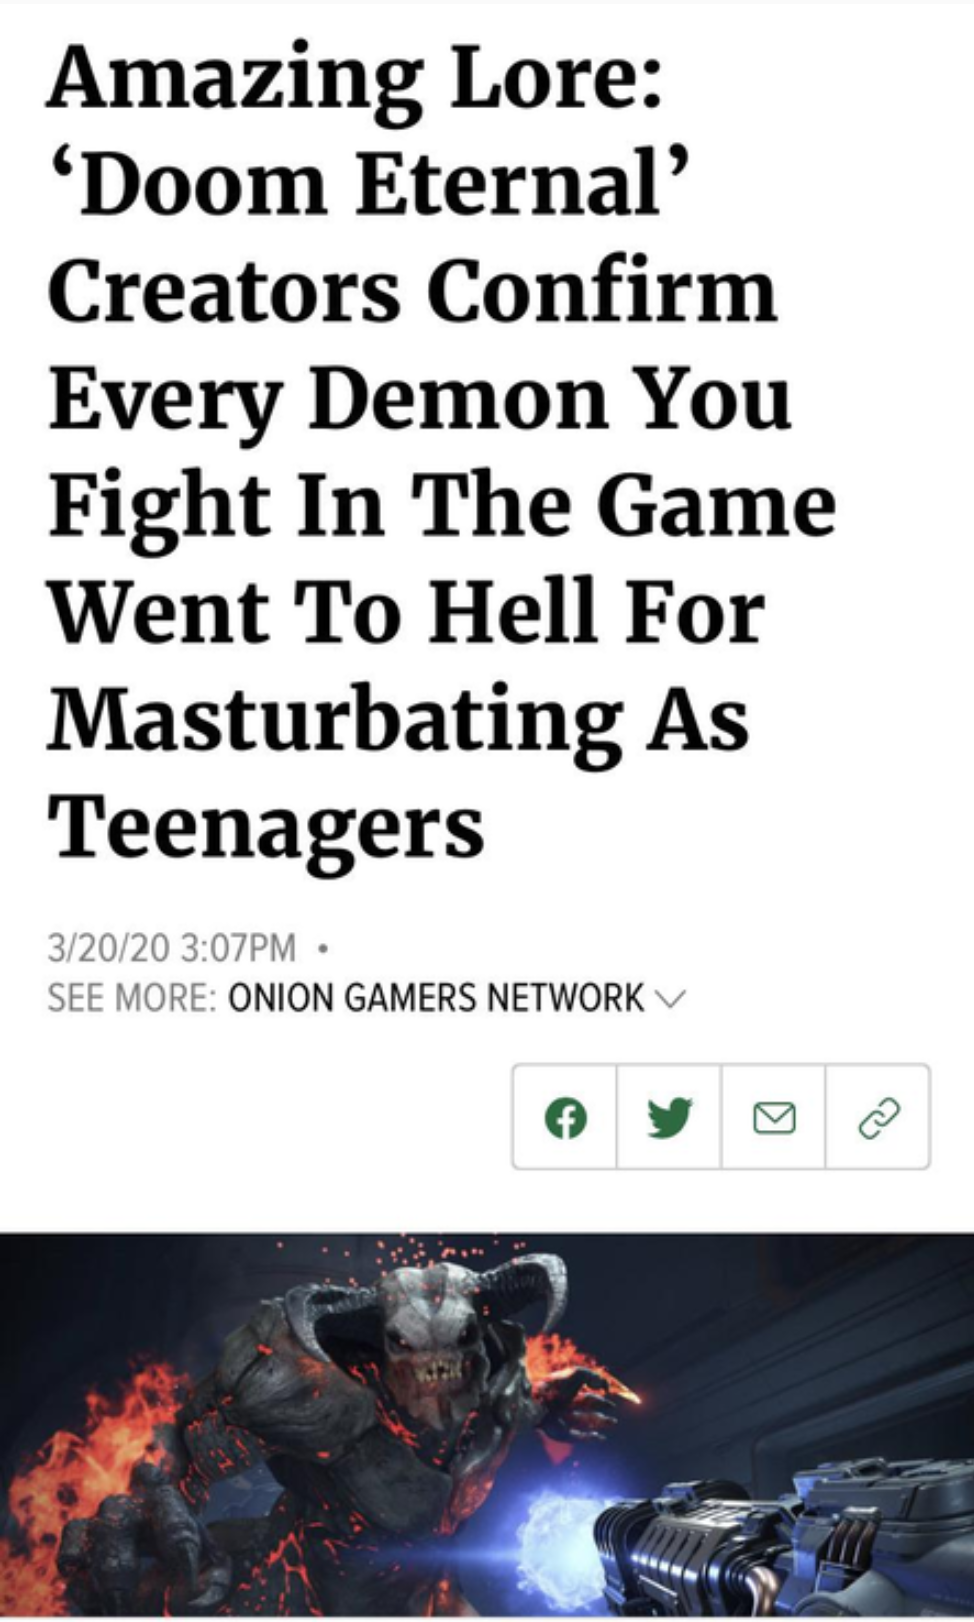 funny gaming memes - onion doom eternal - Amazing Lore 'Doom Eternal' Creators Confirm Every Demon You Fight In The Game Went To Hell For Masturbating As Teenagers 32020 Pm See More Onion Gamers Network